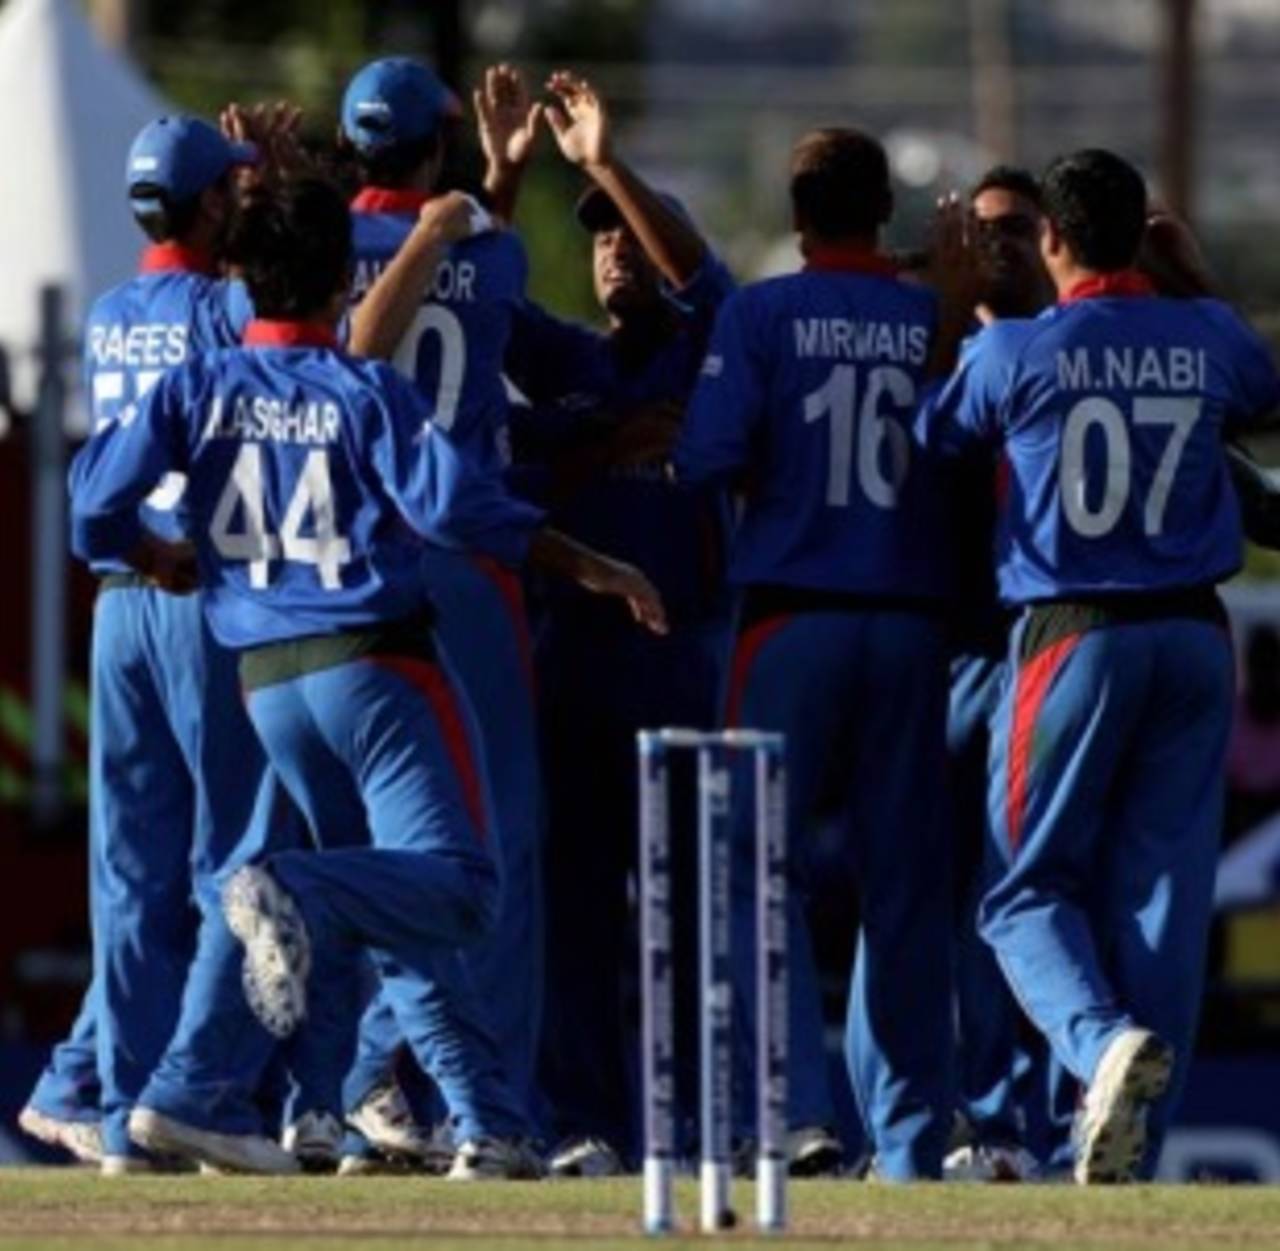 Afghanistan Cricket Board announces an organisational review to find qualified staff to run their cricket administration&nbsp;&nbsp;&bull;&nbsp;&nbsp;Getty Images